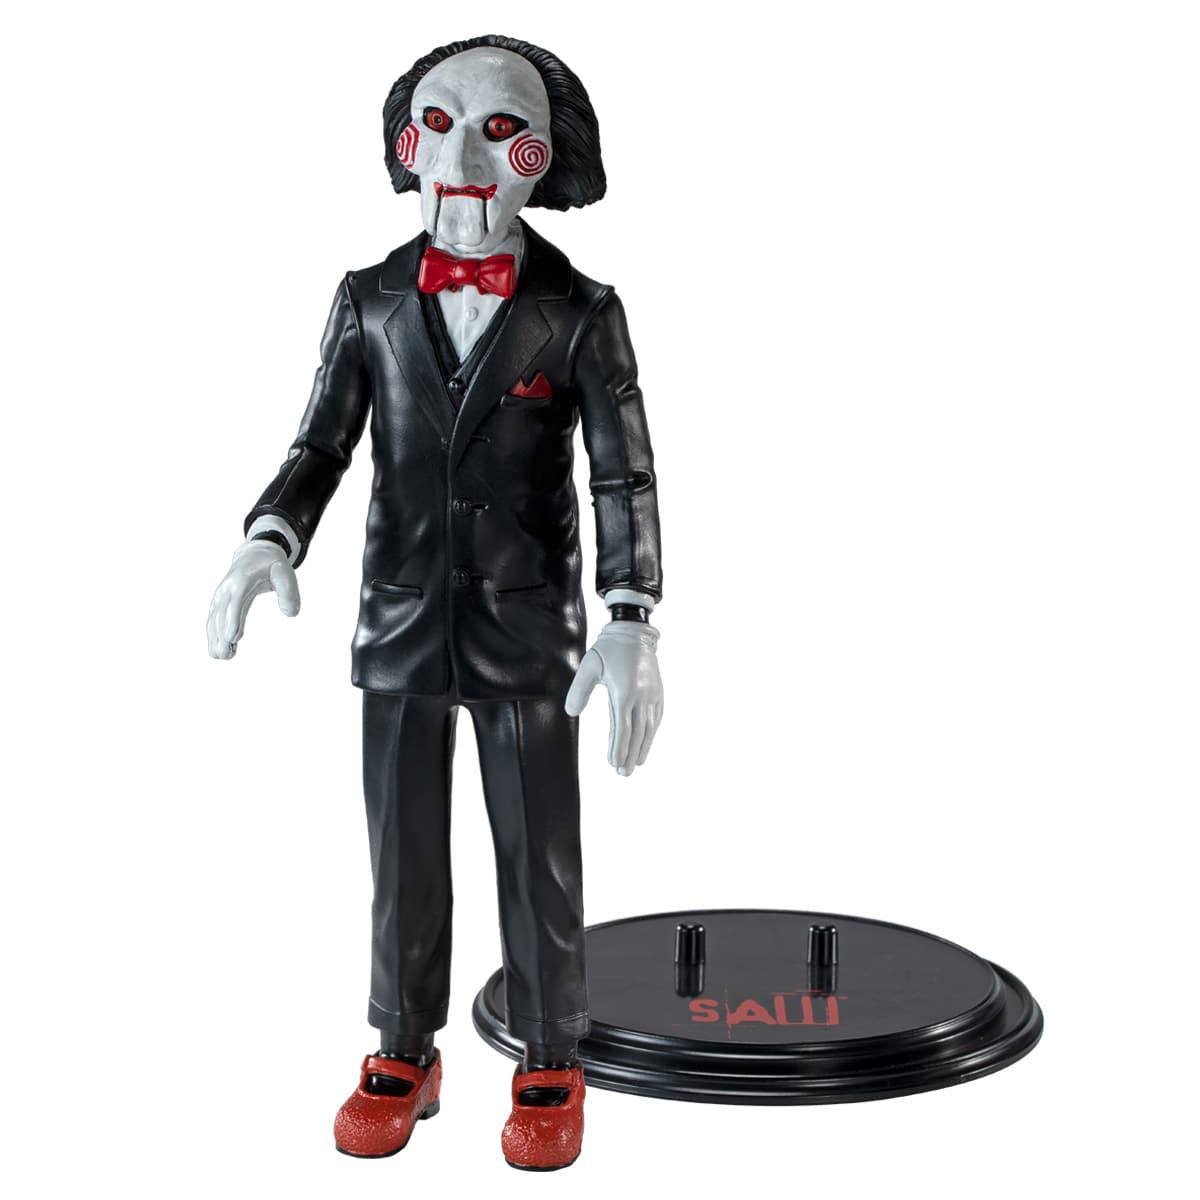 Saw - Billy Puppet - Toyllectibles Bendyfigs